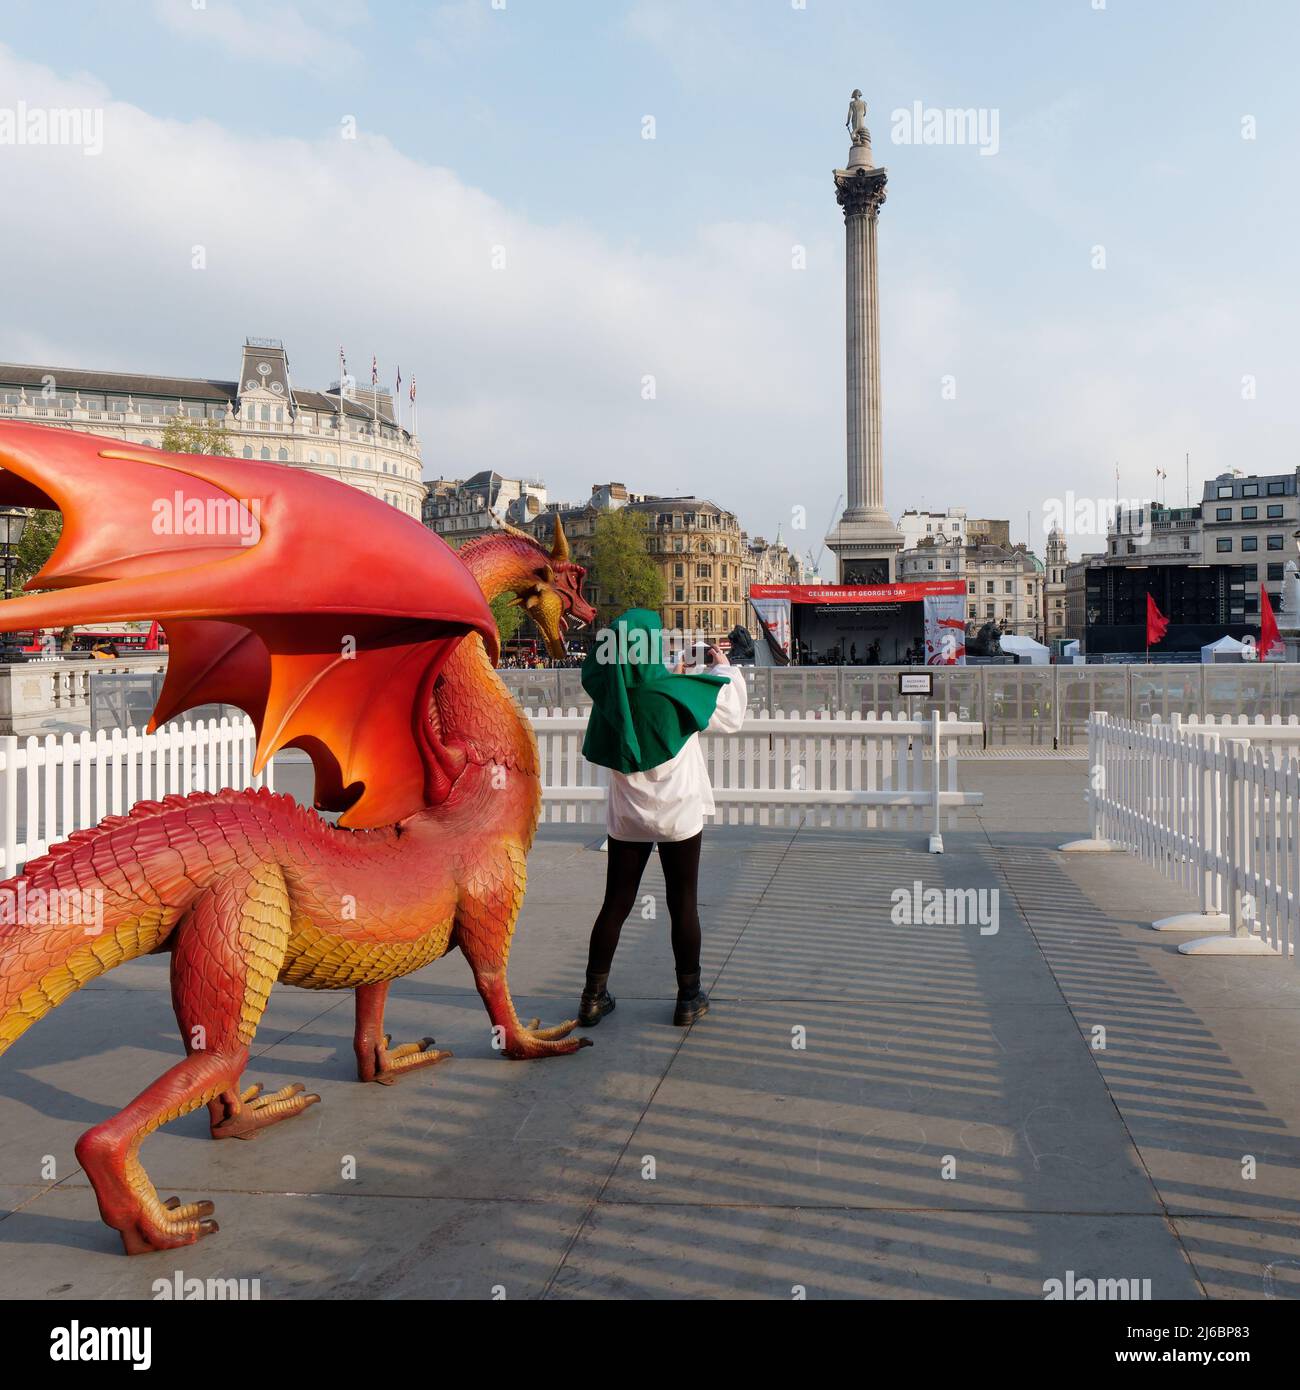 London, Greater London, England, April 23 2022: Lady in an outfit taking a selfie with the Dragon in Trafalgar Square on St Georges Day. Stock Photo